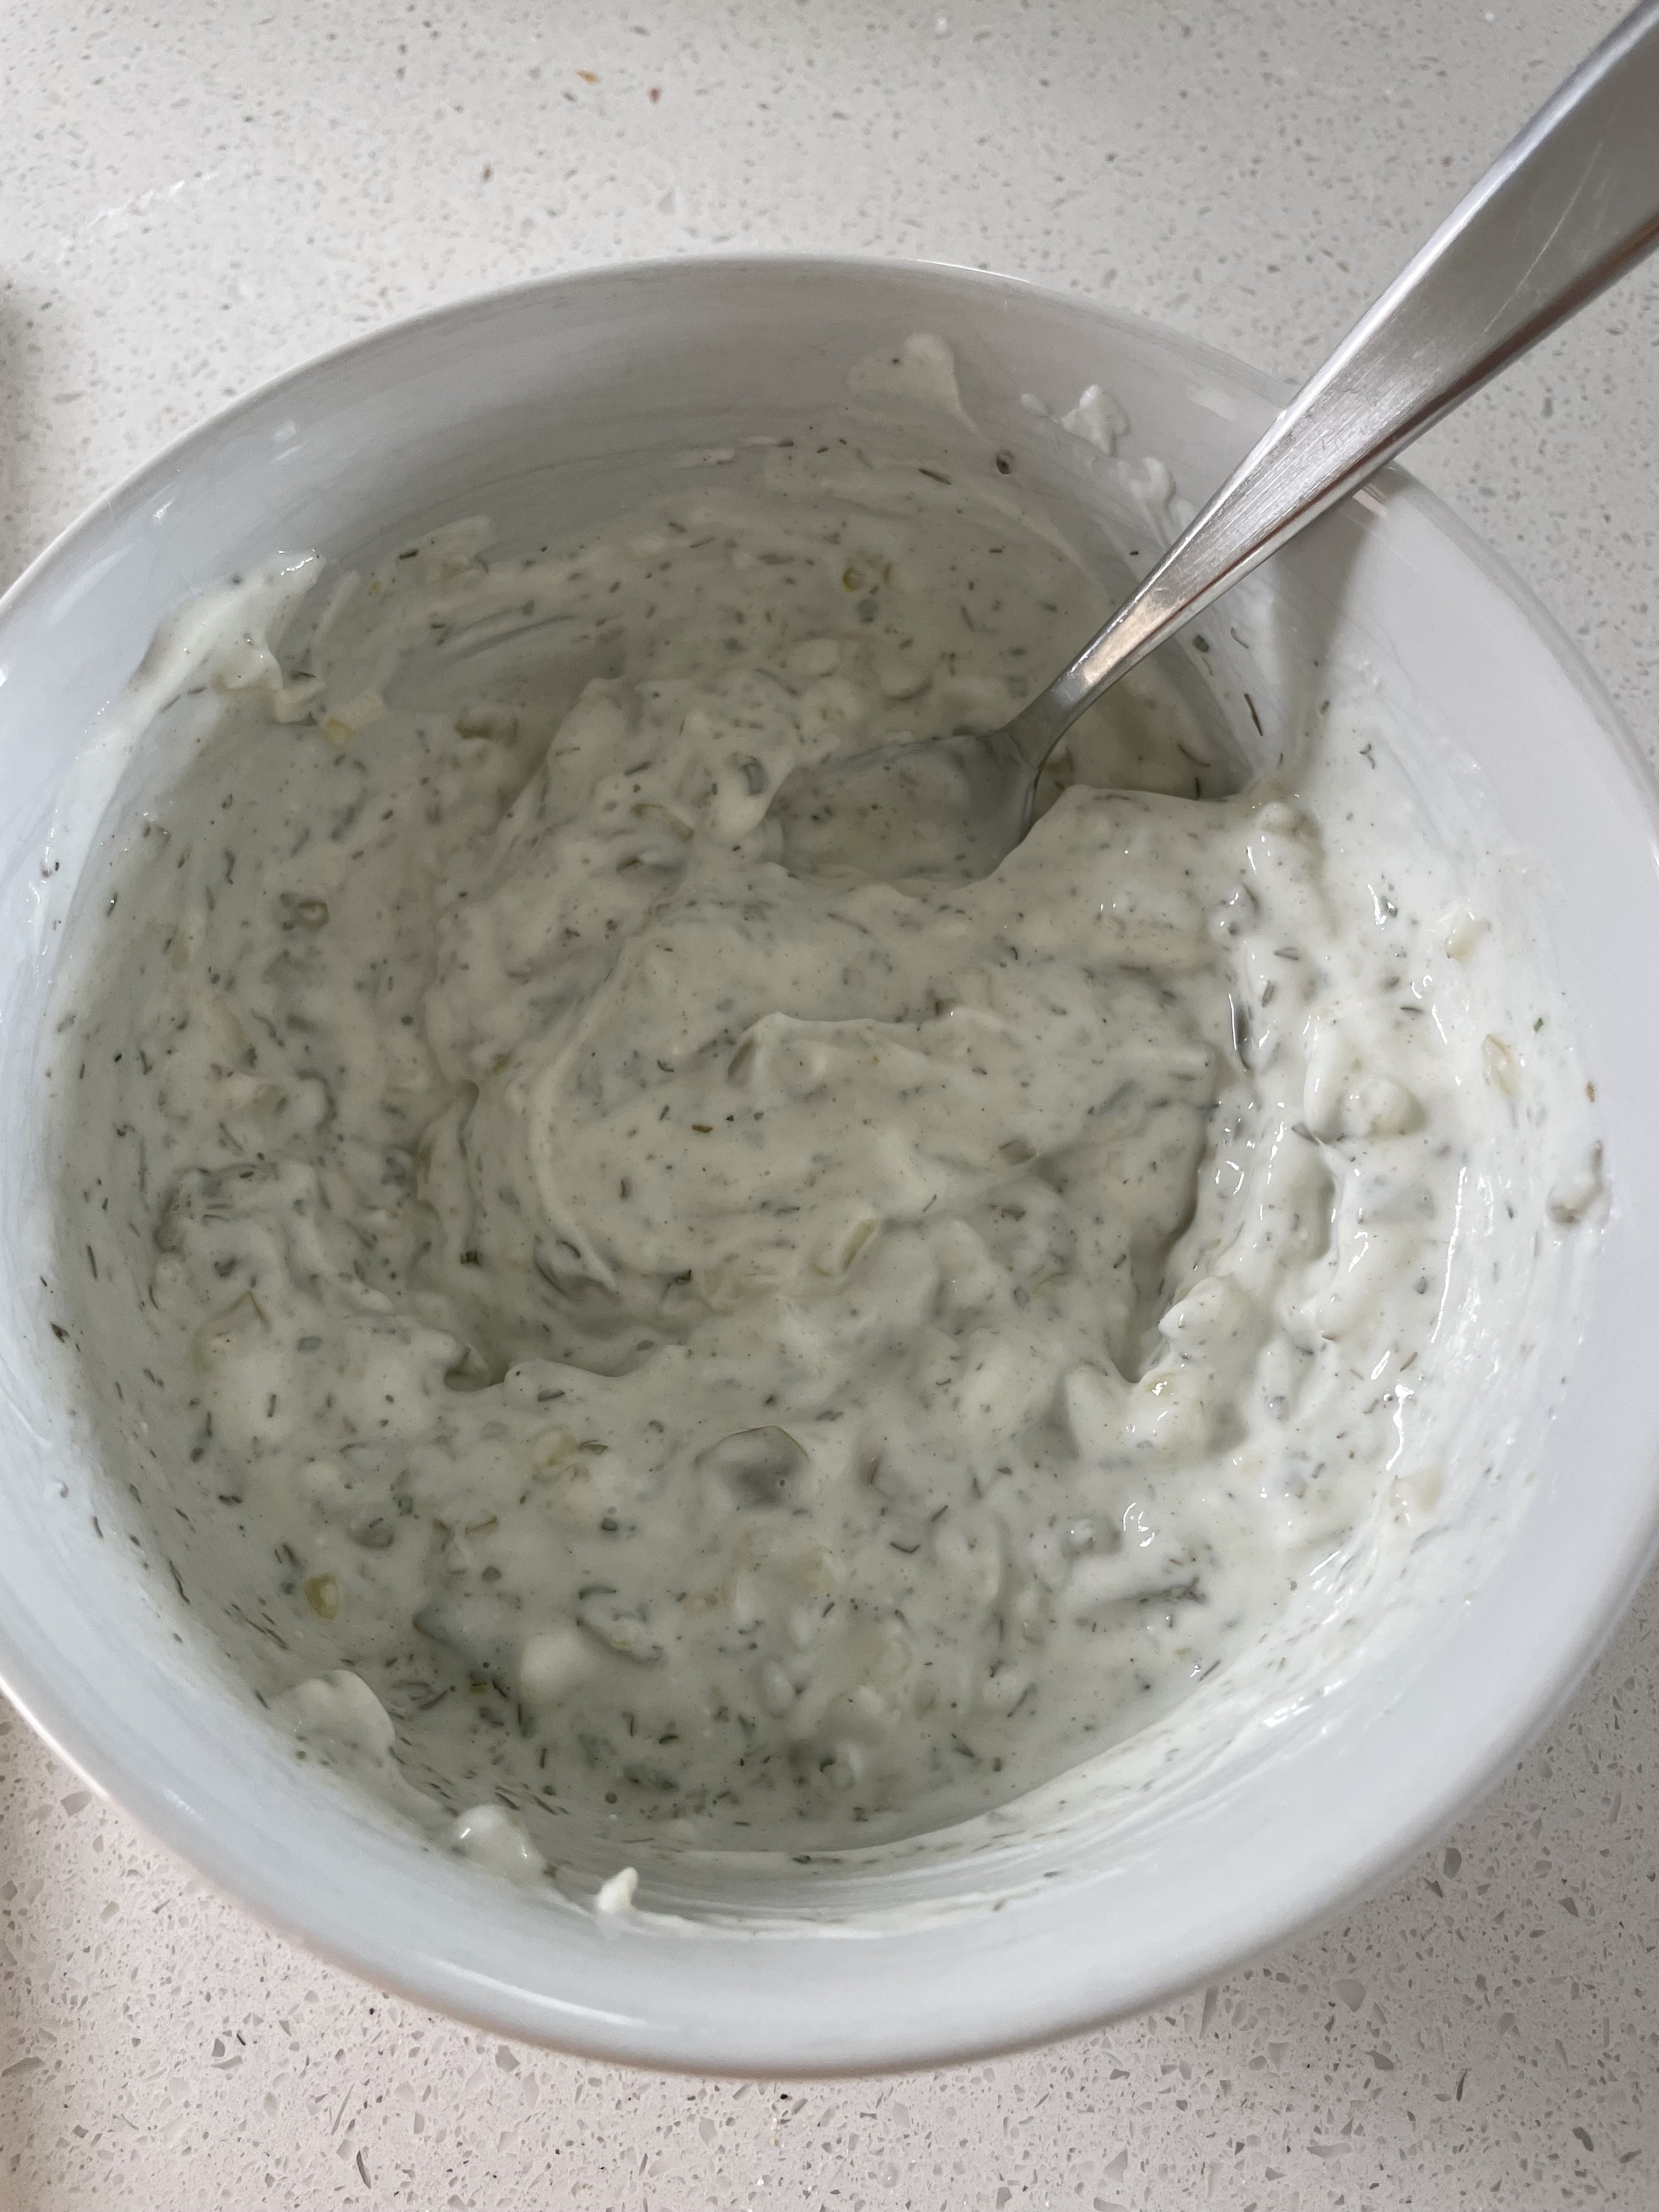 Dill pickle ranch sauce in a bowl